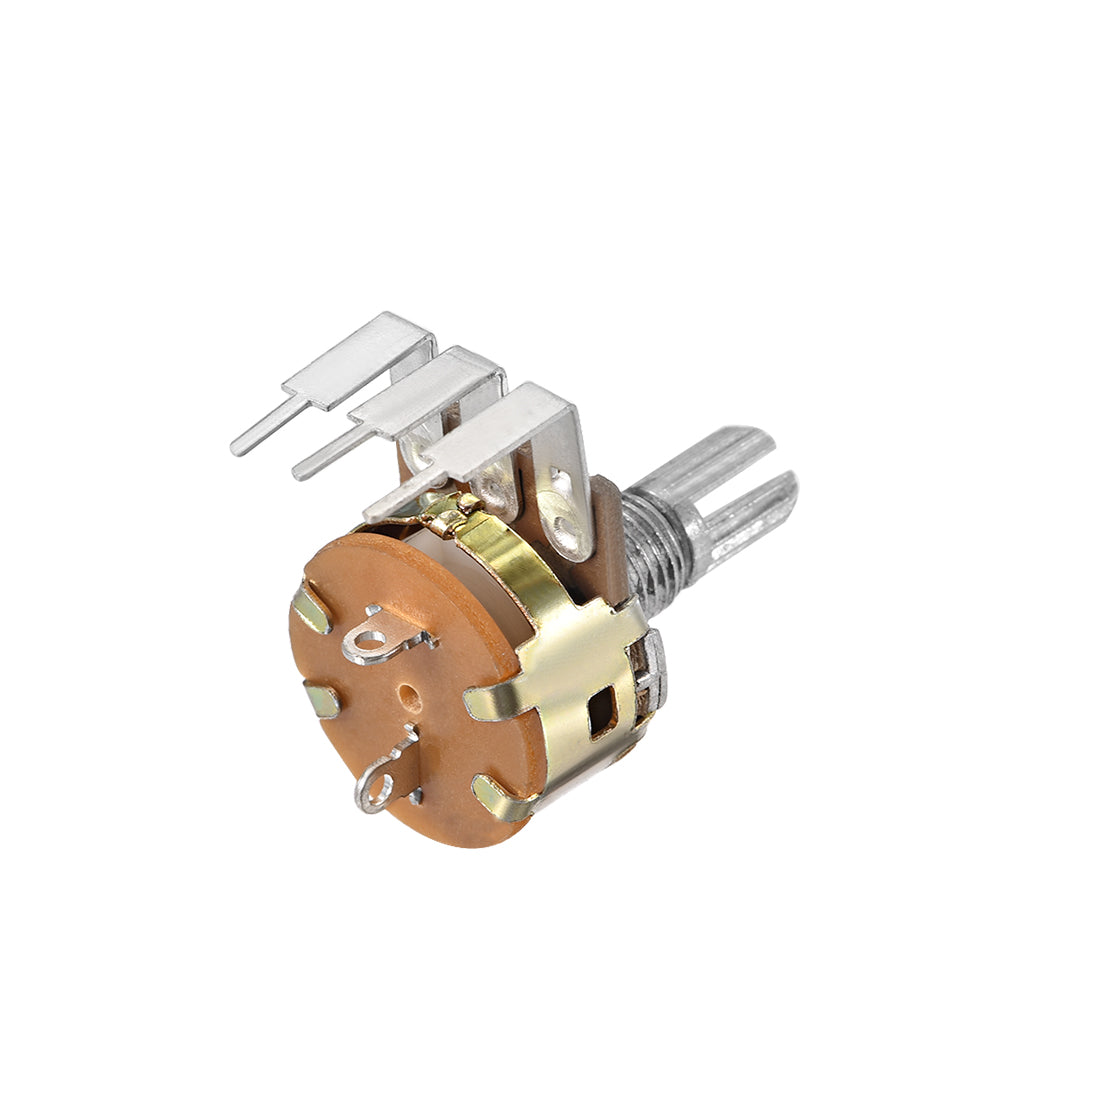 uxcell Uxcell WH148 Potentiometer with Switch 50K Ohm Variable Resistors Single Turn Rotary Carbon Film Taper 10pcs